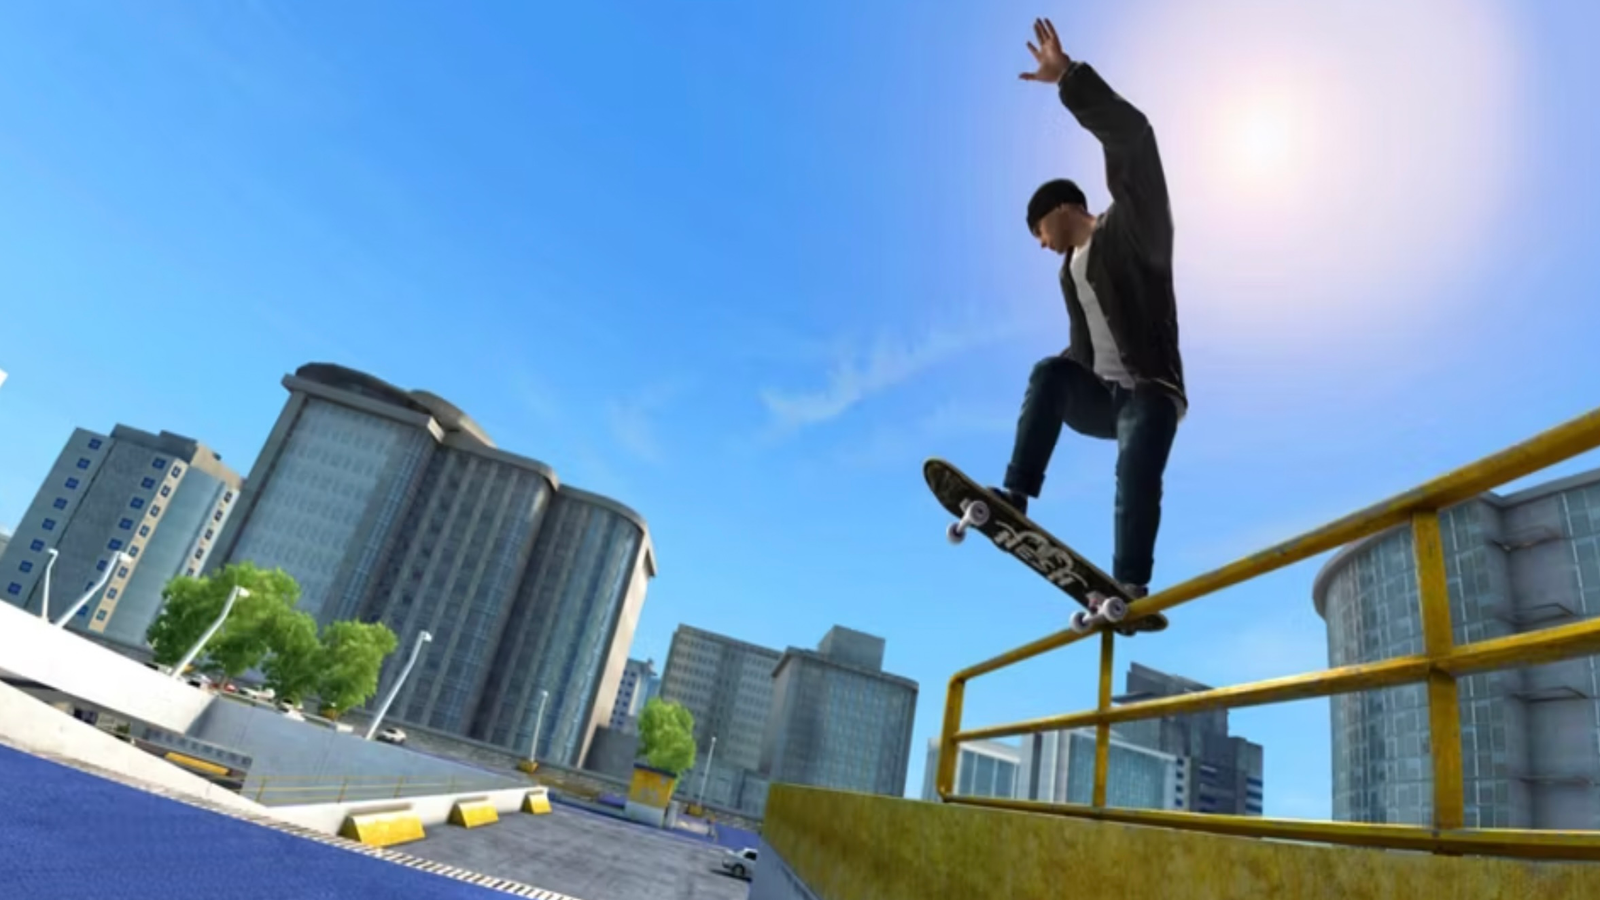 Skate 4 Playtest Sign-Ups Available Now - PlayStation LifeStyle